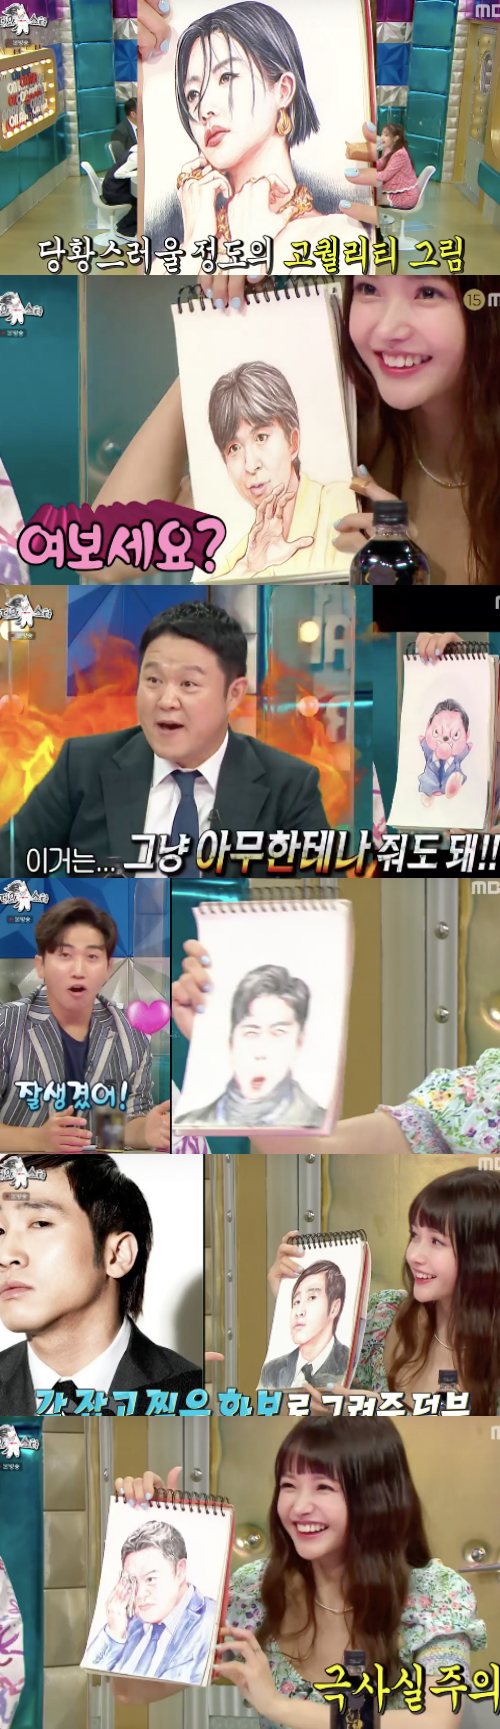 In Radio Star, Ha Yeon-soo unveiled his outstanding painting skills with Hakaso.Hong Yoon-hwa, Lee Eun-hyung, Ha Yeon-soo and Girl Chuuu of the Month appeared on MBC entertainment Radio Star on the 7th.On this day, the face of the cloth, Hong Yoon-hwa, said that he resembled Ko Chang-seok as a doppelganger.Lee Eun-hyung also parodied Song Ji-hyo, Yang Chi-seung and Han Ji-hyun Actor, who plays Joo Seok-kyung, who appears in Pent House, saying, I commented that it is too much.Lee Eun-hyung, who mentioned the couples gag to Hong Yoon-hwa and Lee Eun-hyung, said that he was on stage when he fought the couple, and asked about Kwon Tae-gi.When asked about the surprise question, Lee said, I am trying not to meet each other at home, and all said, I do not think it is Kwon Tae. Kim Gu said, It can be Kwon Tae. In the end, Lee Eun-hyung replied, It is your boredom.Kim Gu said, I know why Husband fought, Jae Jun, you will be hard.He then introduced Girl Chuuu as the hottest entertainment stone of the month.Chuuuu, who recently shot an advertisement for ionic beverages, laughed, saying, I was burdened because I was alone, I wanted to do it because it was an advertisement taken by Son Ye-jin and Han Ji-min. Kim Gu said, I am tired personally because I have been watching for a long time.Chuuuu explained his real name as Jiu, and Chuuuu was the name given by the company.As for the reason for many hand movements to the emerging man, Chuuuu, he said, My mother is a vocalist, my father is just happy, and he has a lot of charm.Hong Yoon-hwa said, I was surprised to meet Cheu for the first time at entertainment, this Friend is equipped with full option of liquid bridge, even without camera.Ha Yeon-soo starred.When everyone welcomed Kim Gu, saying, It is hard to see in entertainment, Ha Yeon-soo was pleased to see Kim Gu and said, I came to My Real Television (Maritel) and said, I got the word honey no jam at the time, and I am the founder of the word.Kim Gu said, I am like Mr. Yeon-soo, I am a while. Ha Yeon-soo said, I am 32 years old because I am 90 years old. Kim Gu said, I am 85 years old, I am sorry, I am longer.Ive been stuck in a tarot card store these days and Ive seen Tarot because there was a spiritual spirit around him before he appeared in Radio Star, Ha Yeon-soo said. Im surprised to hear the prediction that three women are going to see it, and that things will come in.In addition, Ha Yeon-soo laughed at the nickname among the friends, saying, The 5th Takurang 10th line, the word choice is strange.It is actually like a sunbee.Ha Yeon-soo said, I like to avoid the new word as much as possible, I like the call. I use the right words as much as possible when I talk to friends. Kim Gu said, I am so awe, I seem to have met a true friend.Ha Yeon-soo also said that taking pictures was a hobby, even buying films from the Soviet era.Ha Yeon-soo, who also had a talent for painting, said, I have drawn it since I was an elementary school student. He made a picture of MCs himself and admired high quality paintings.Everyone says, This should be pocket money.Even Yoo Se-yoons baboon paintings said, I look good, even Eric feels good.Kim Gu, a Pokémon blue character transformed, was disappointed that Kim Gu said, You can give this to anyone. Then he laughed again at the authentic version of the extreme realism.Capture the Radio Star screen